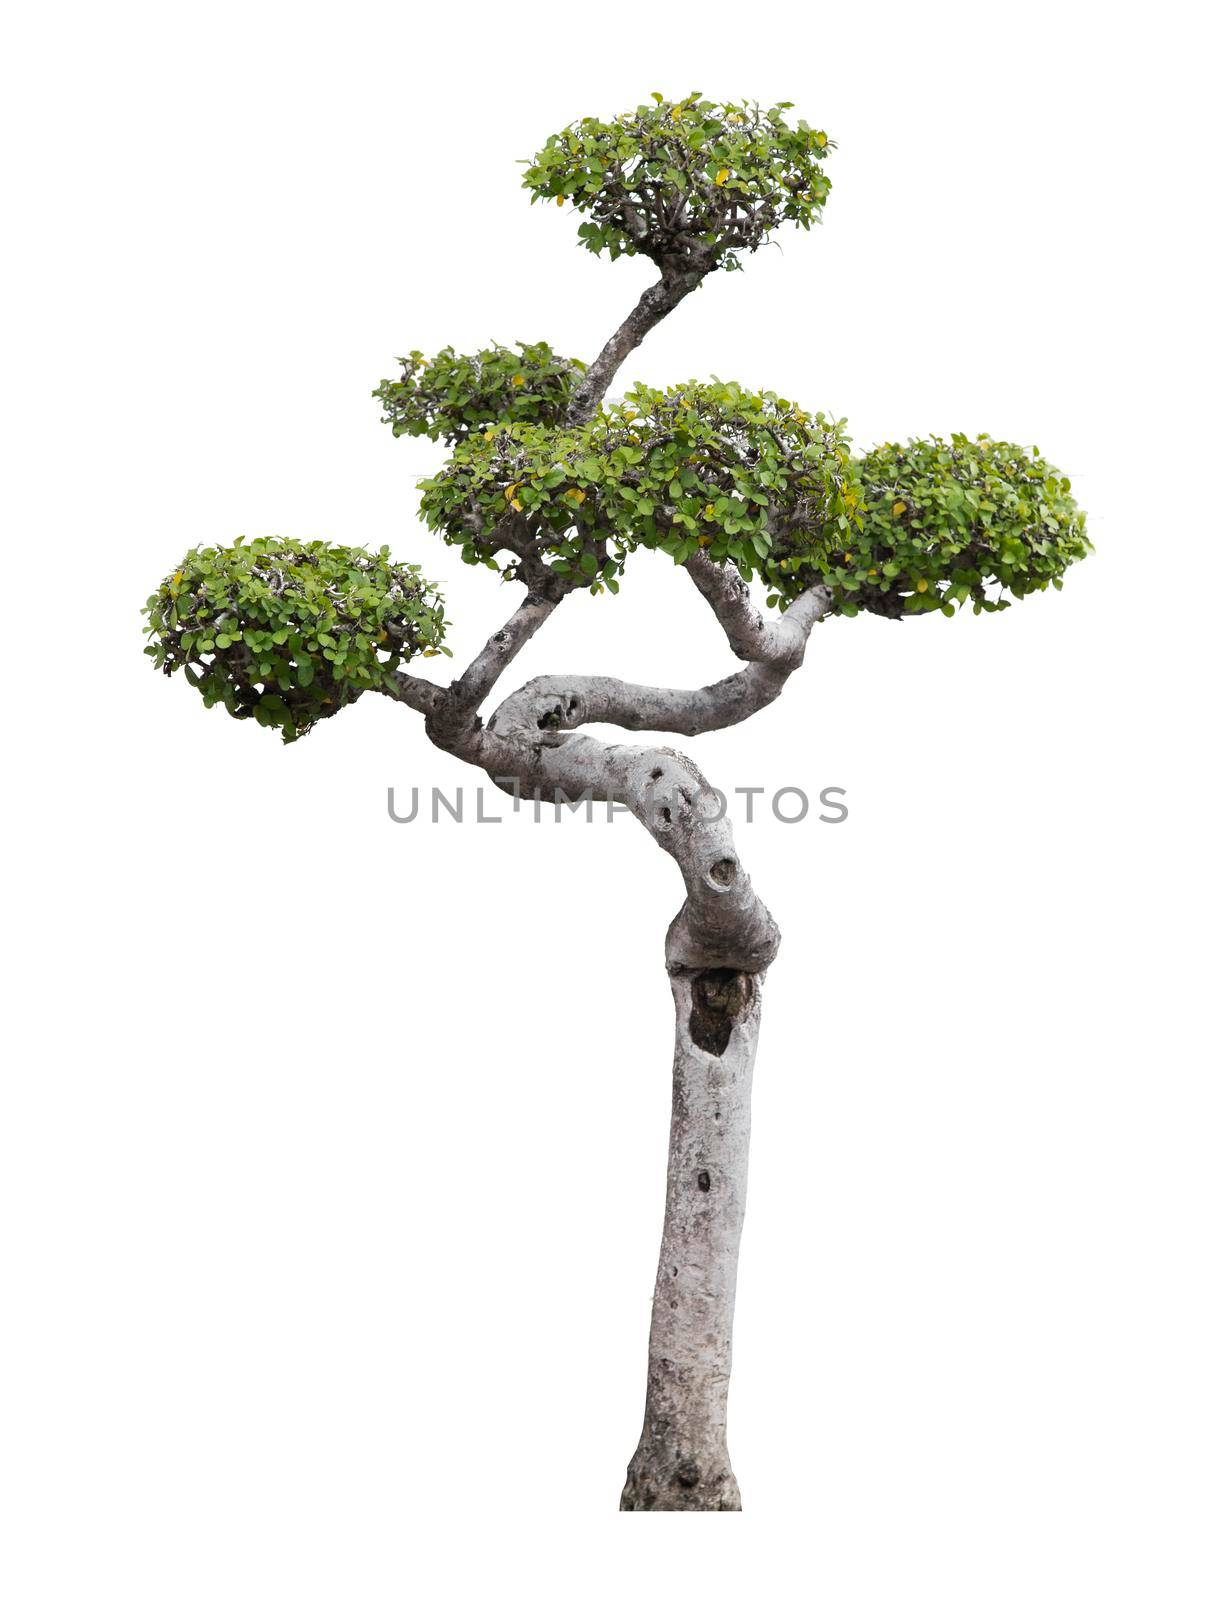 Branches of dwarf isolated on white background with clipping path by Gamjai